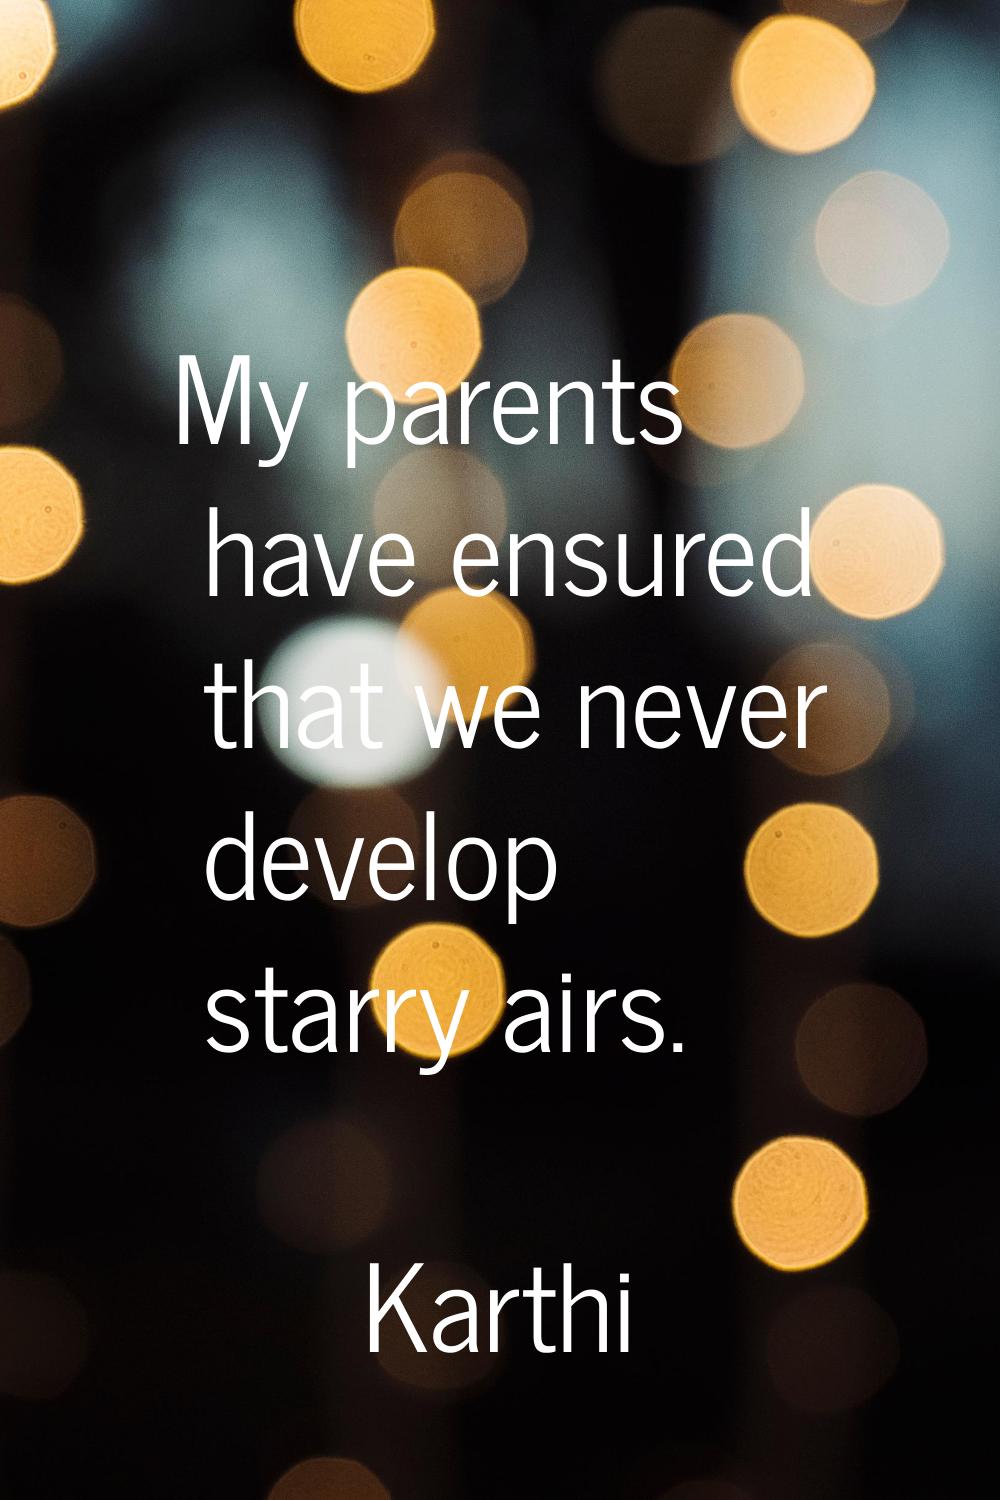 My parents have ensured that we never develop starry airs.